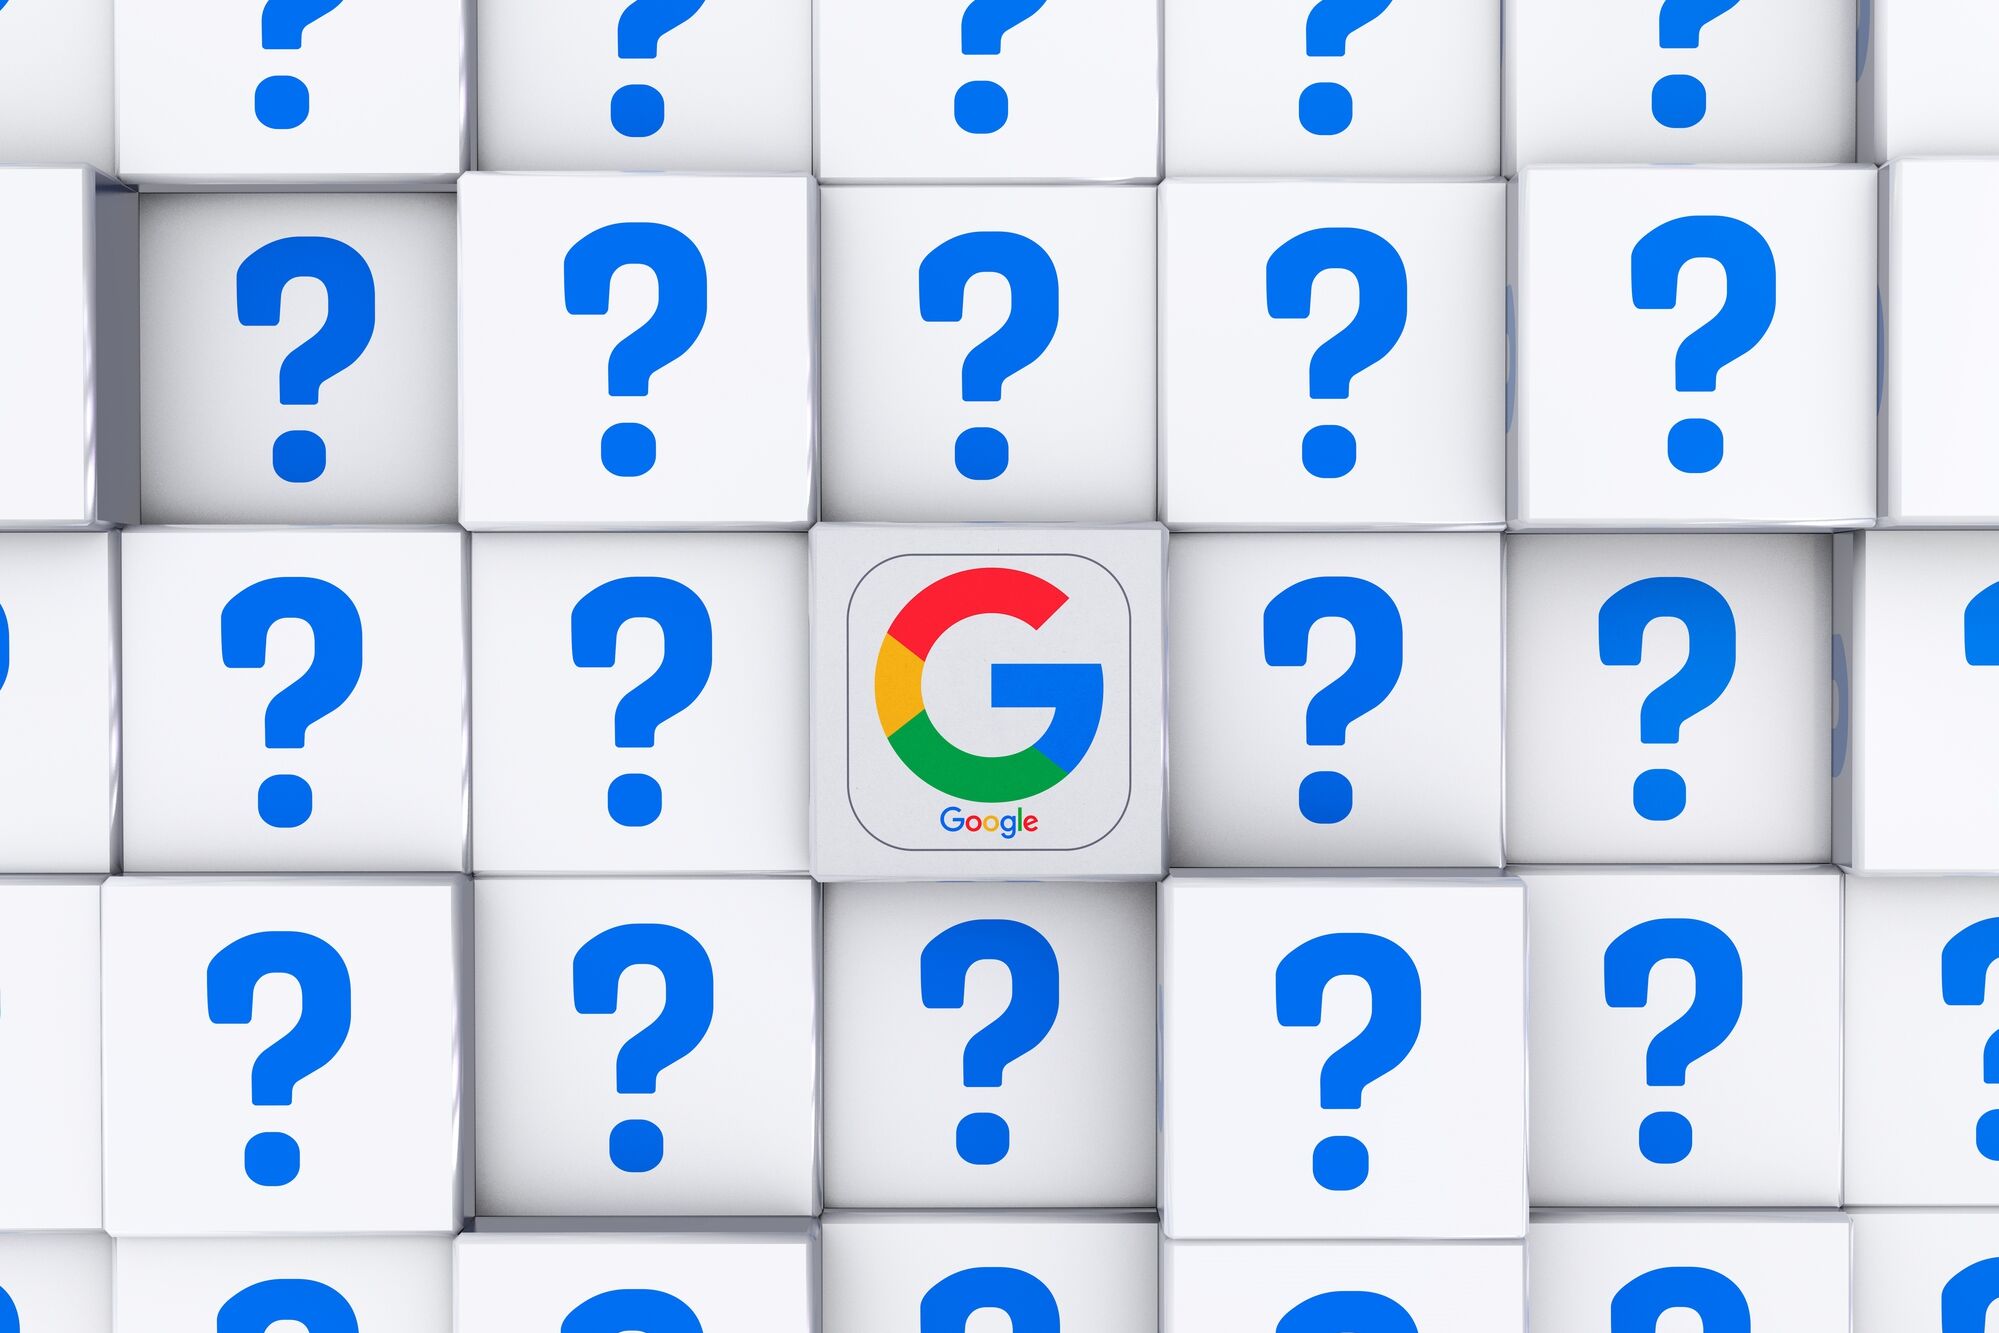 several blue question marks surrounding the Google logo